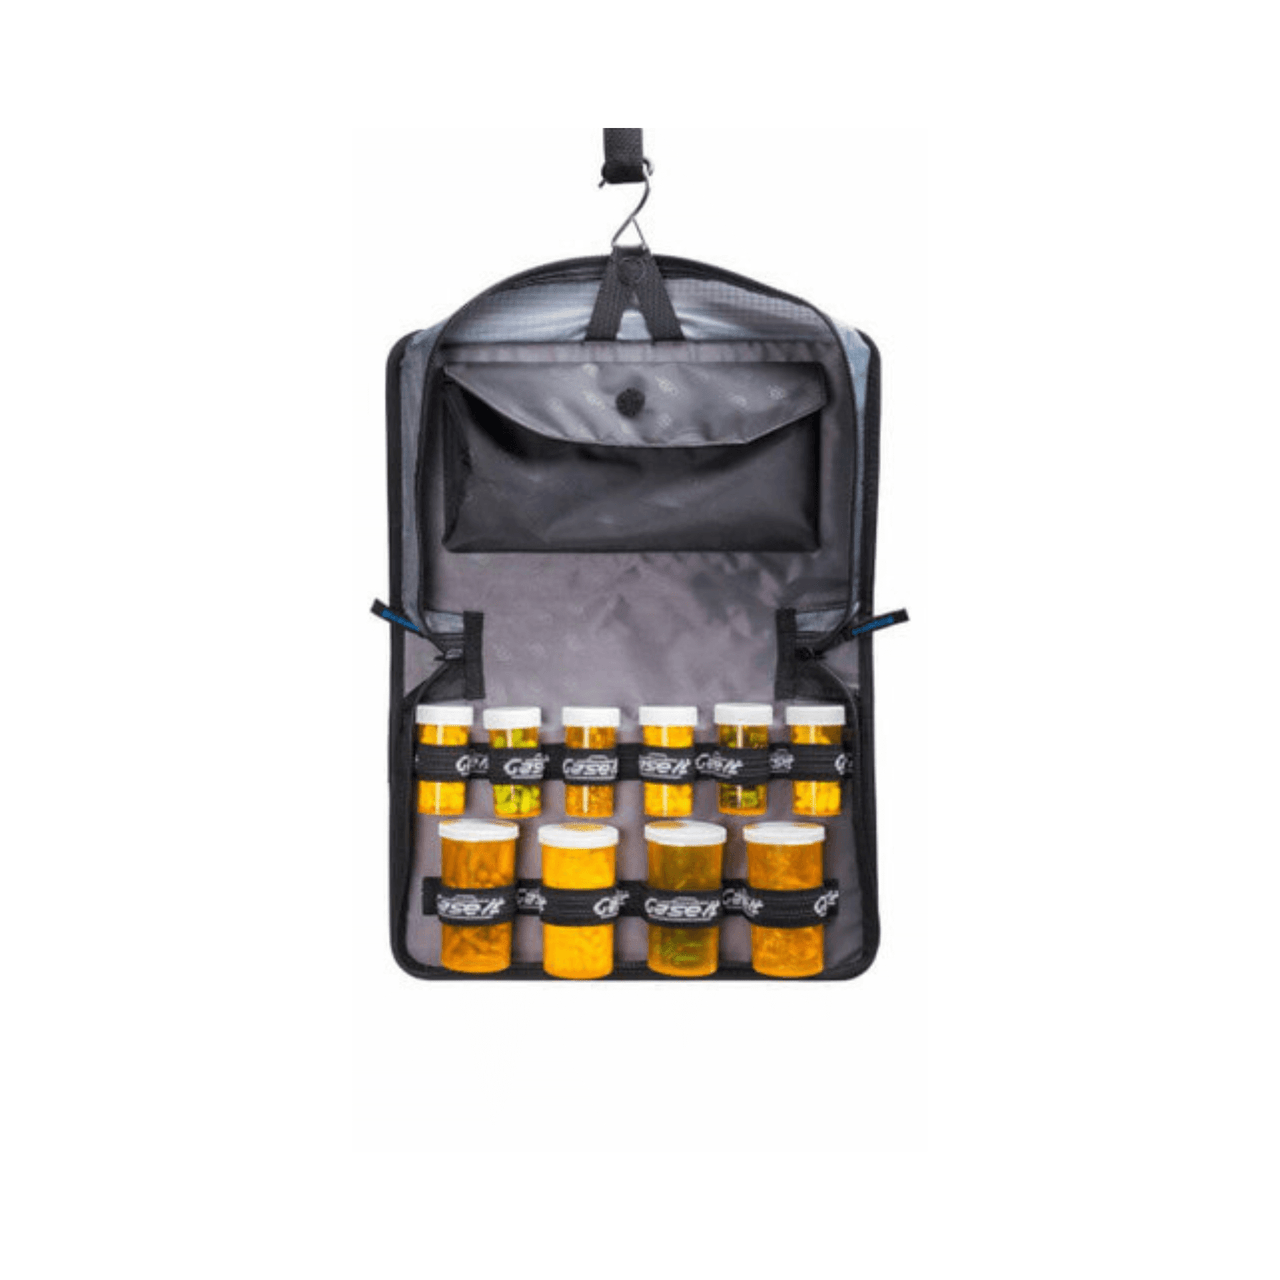 https://cdn11.bigcommerce.com/s-6dpzi5pd3/images/stencil/1280x1280/products/113/441/Mini_Medicine_Organizer_and_Pill_Case_Hanging_1__06531.1694722509.png?c=1?imbypass=on